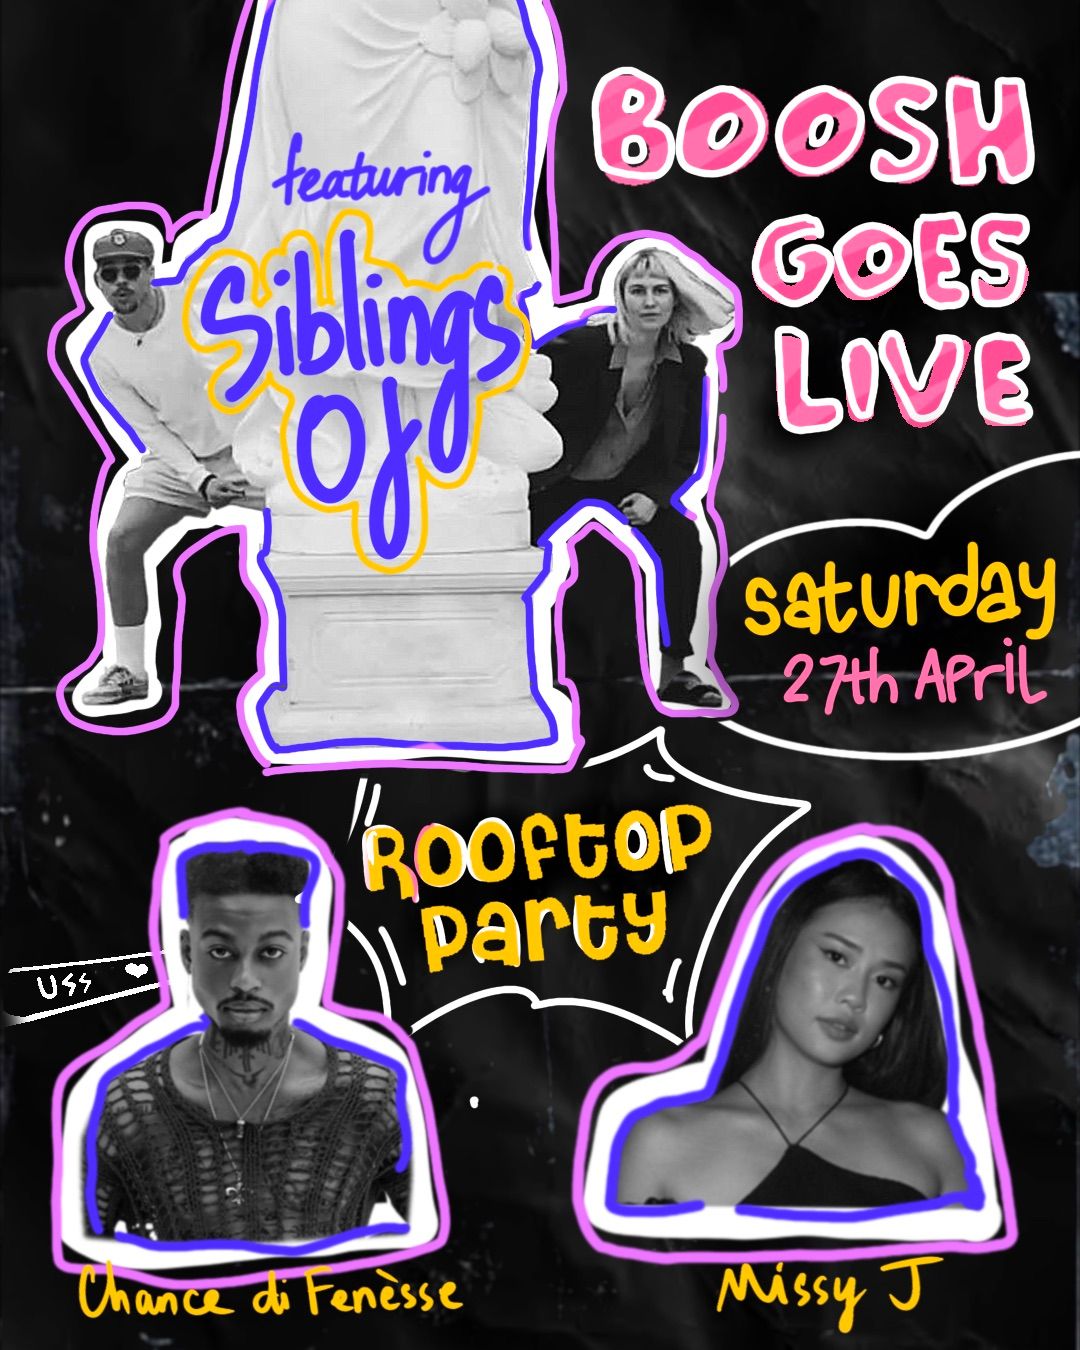 Boosh Goes Live this Saturday\u2019s Rooftop Party 